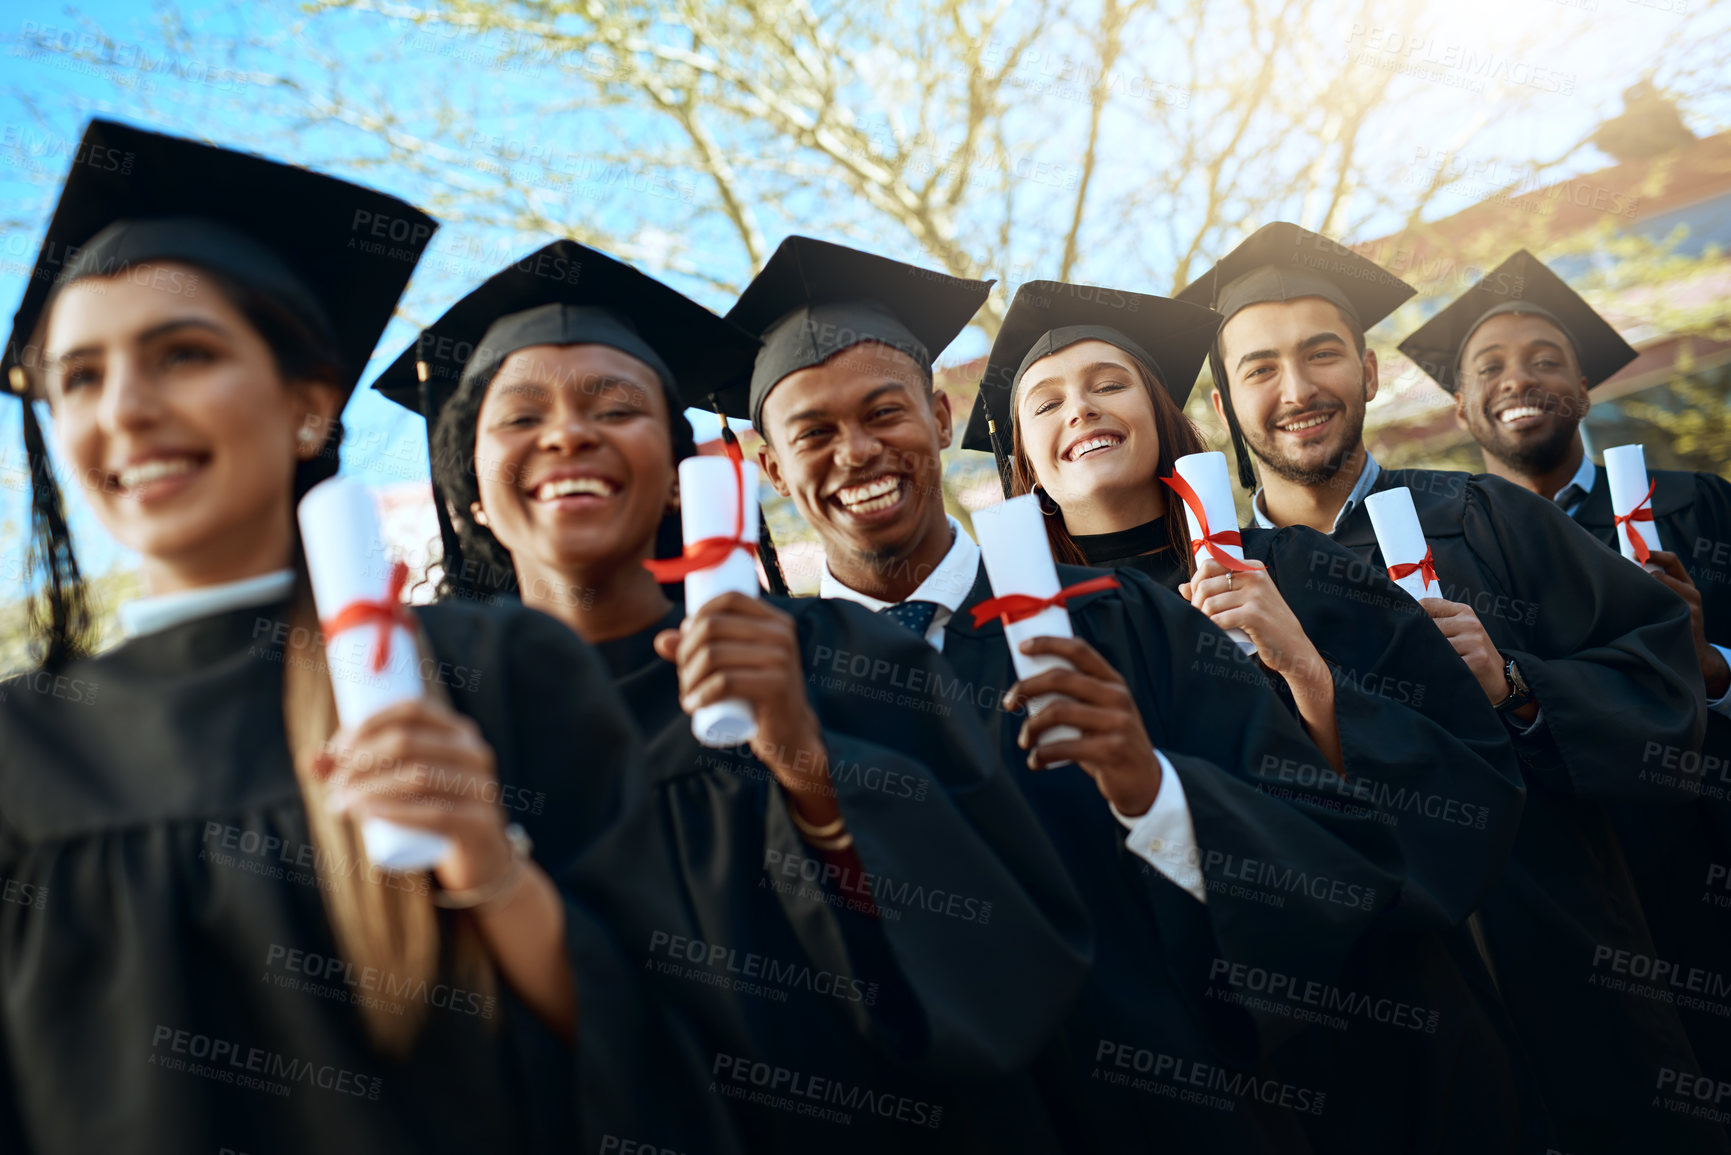 Buy stock photo Portrait of a group of young students holding their diplomas on graduation day